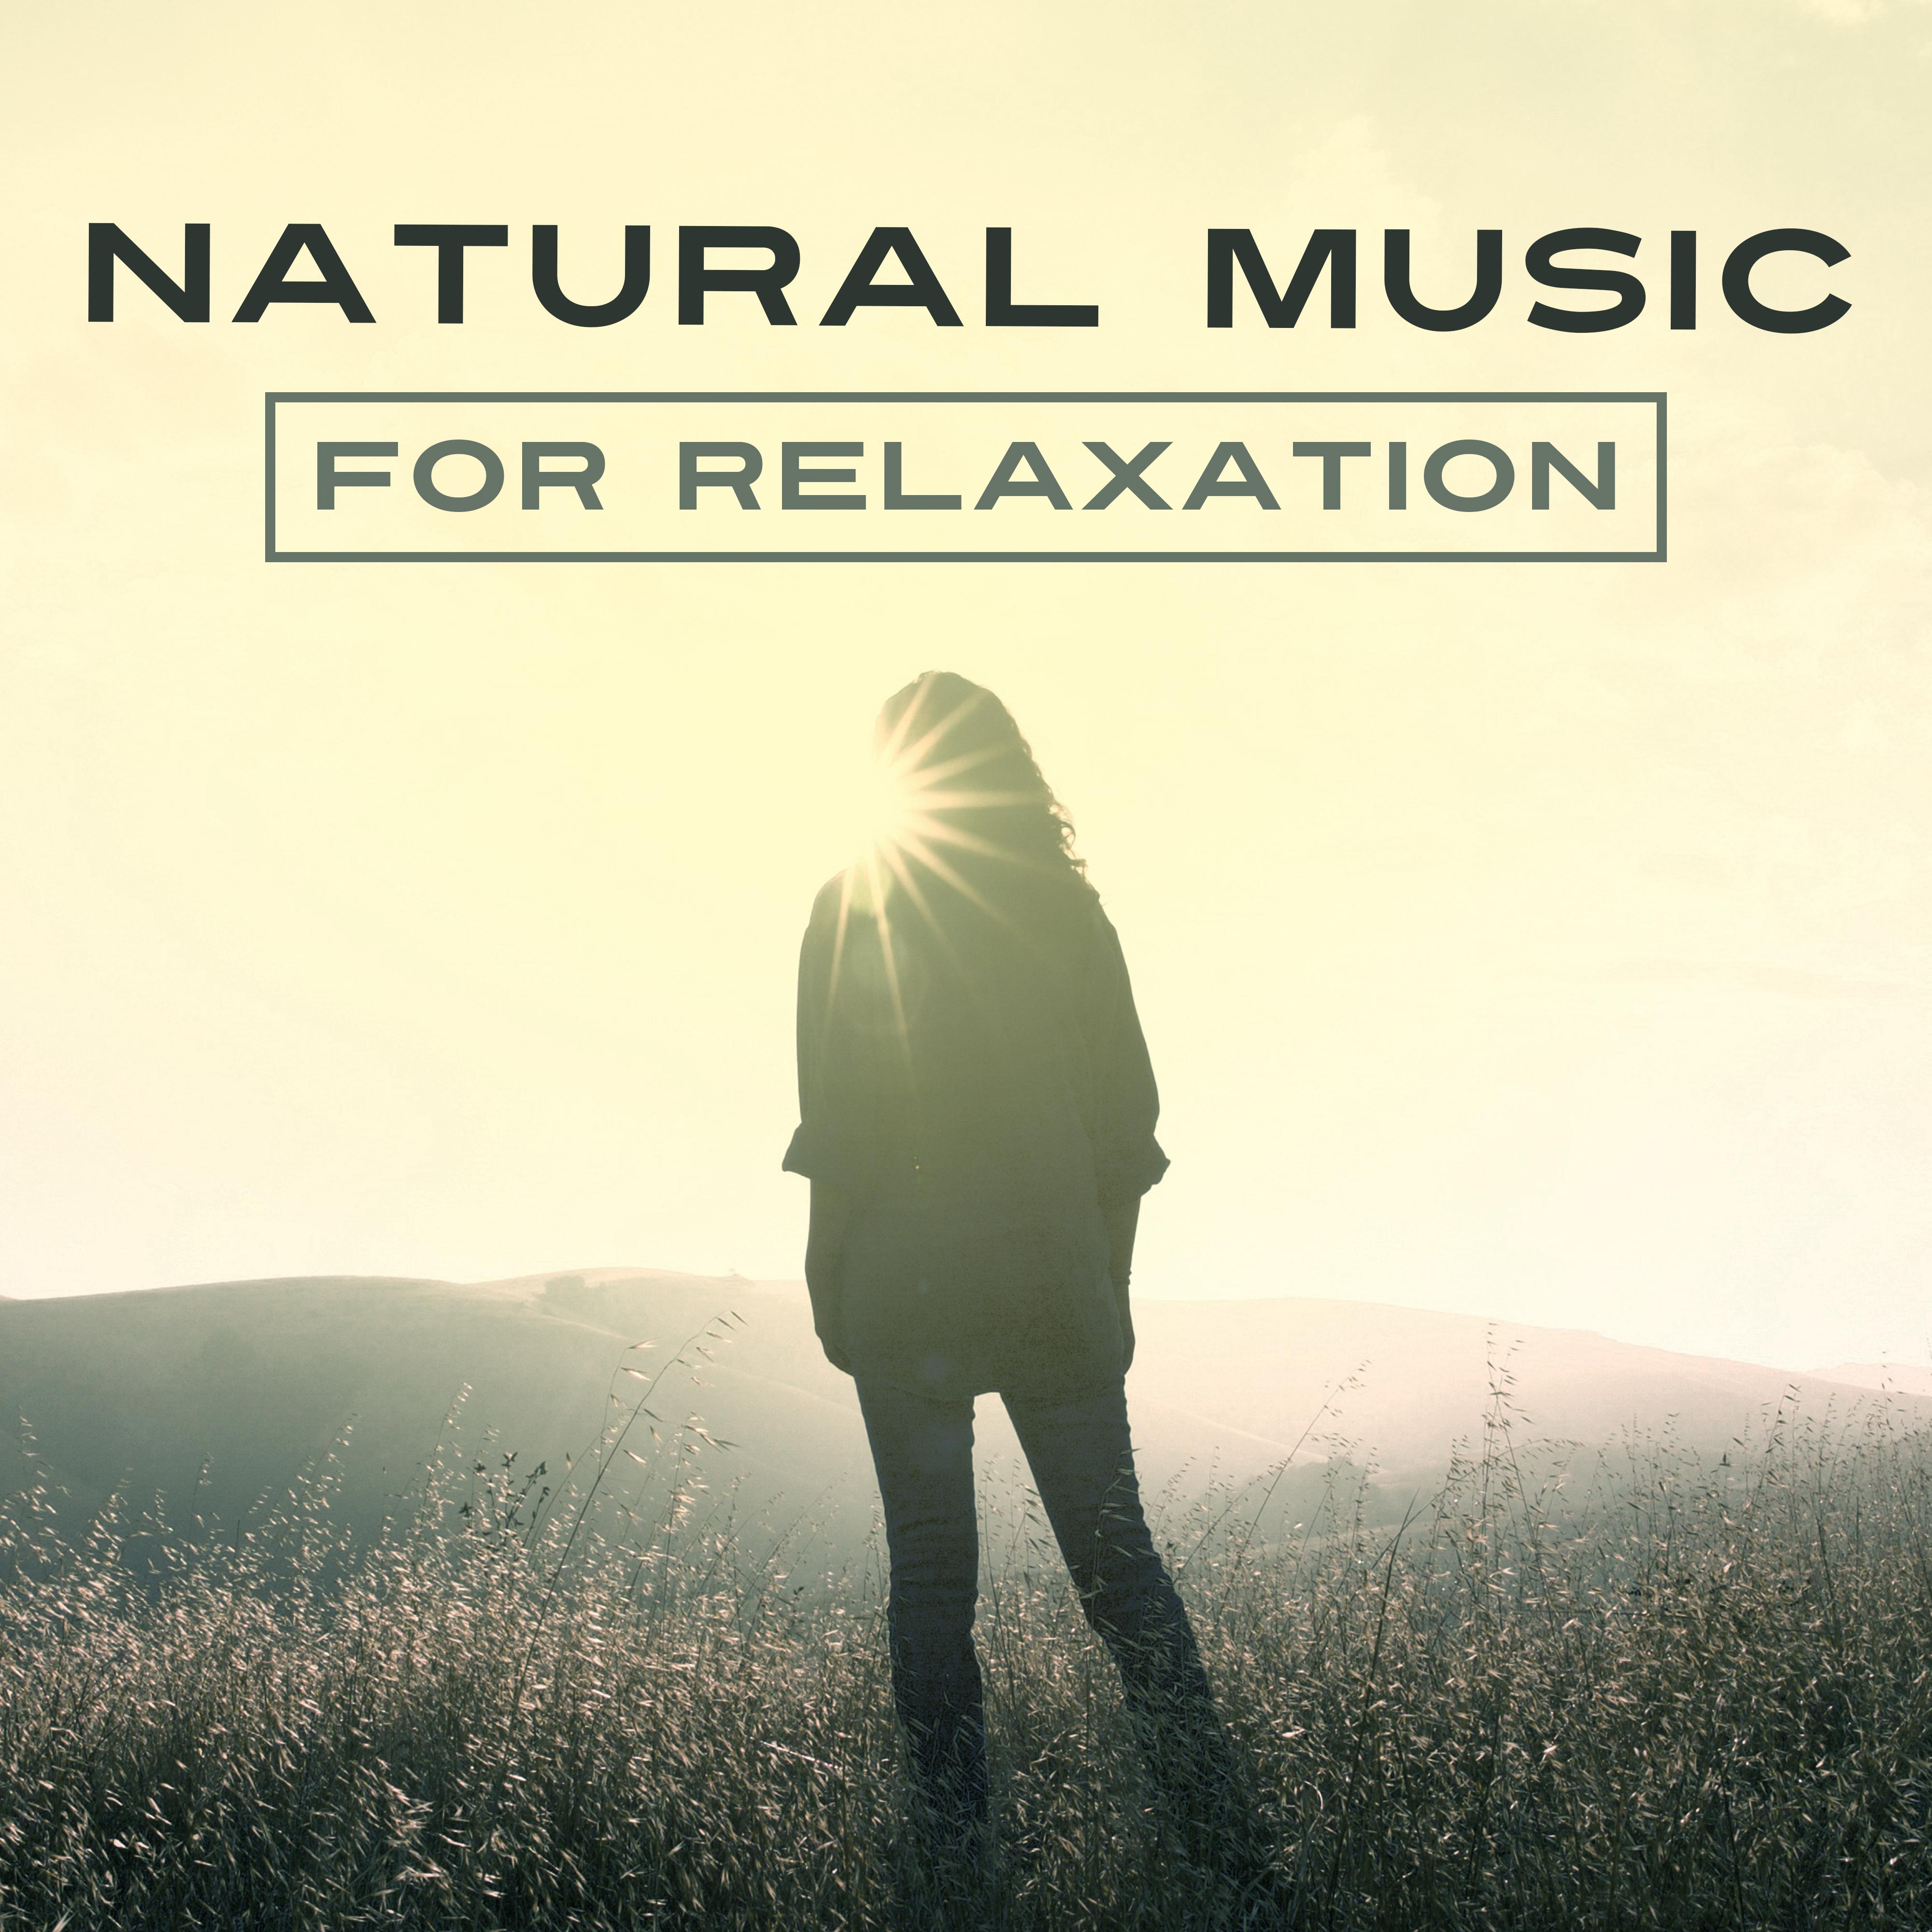 Natural Music for Relaxation  New Age, Sounds of Birds and Water, Peaceful Sounds of Nature, Deeper Relaxation